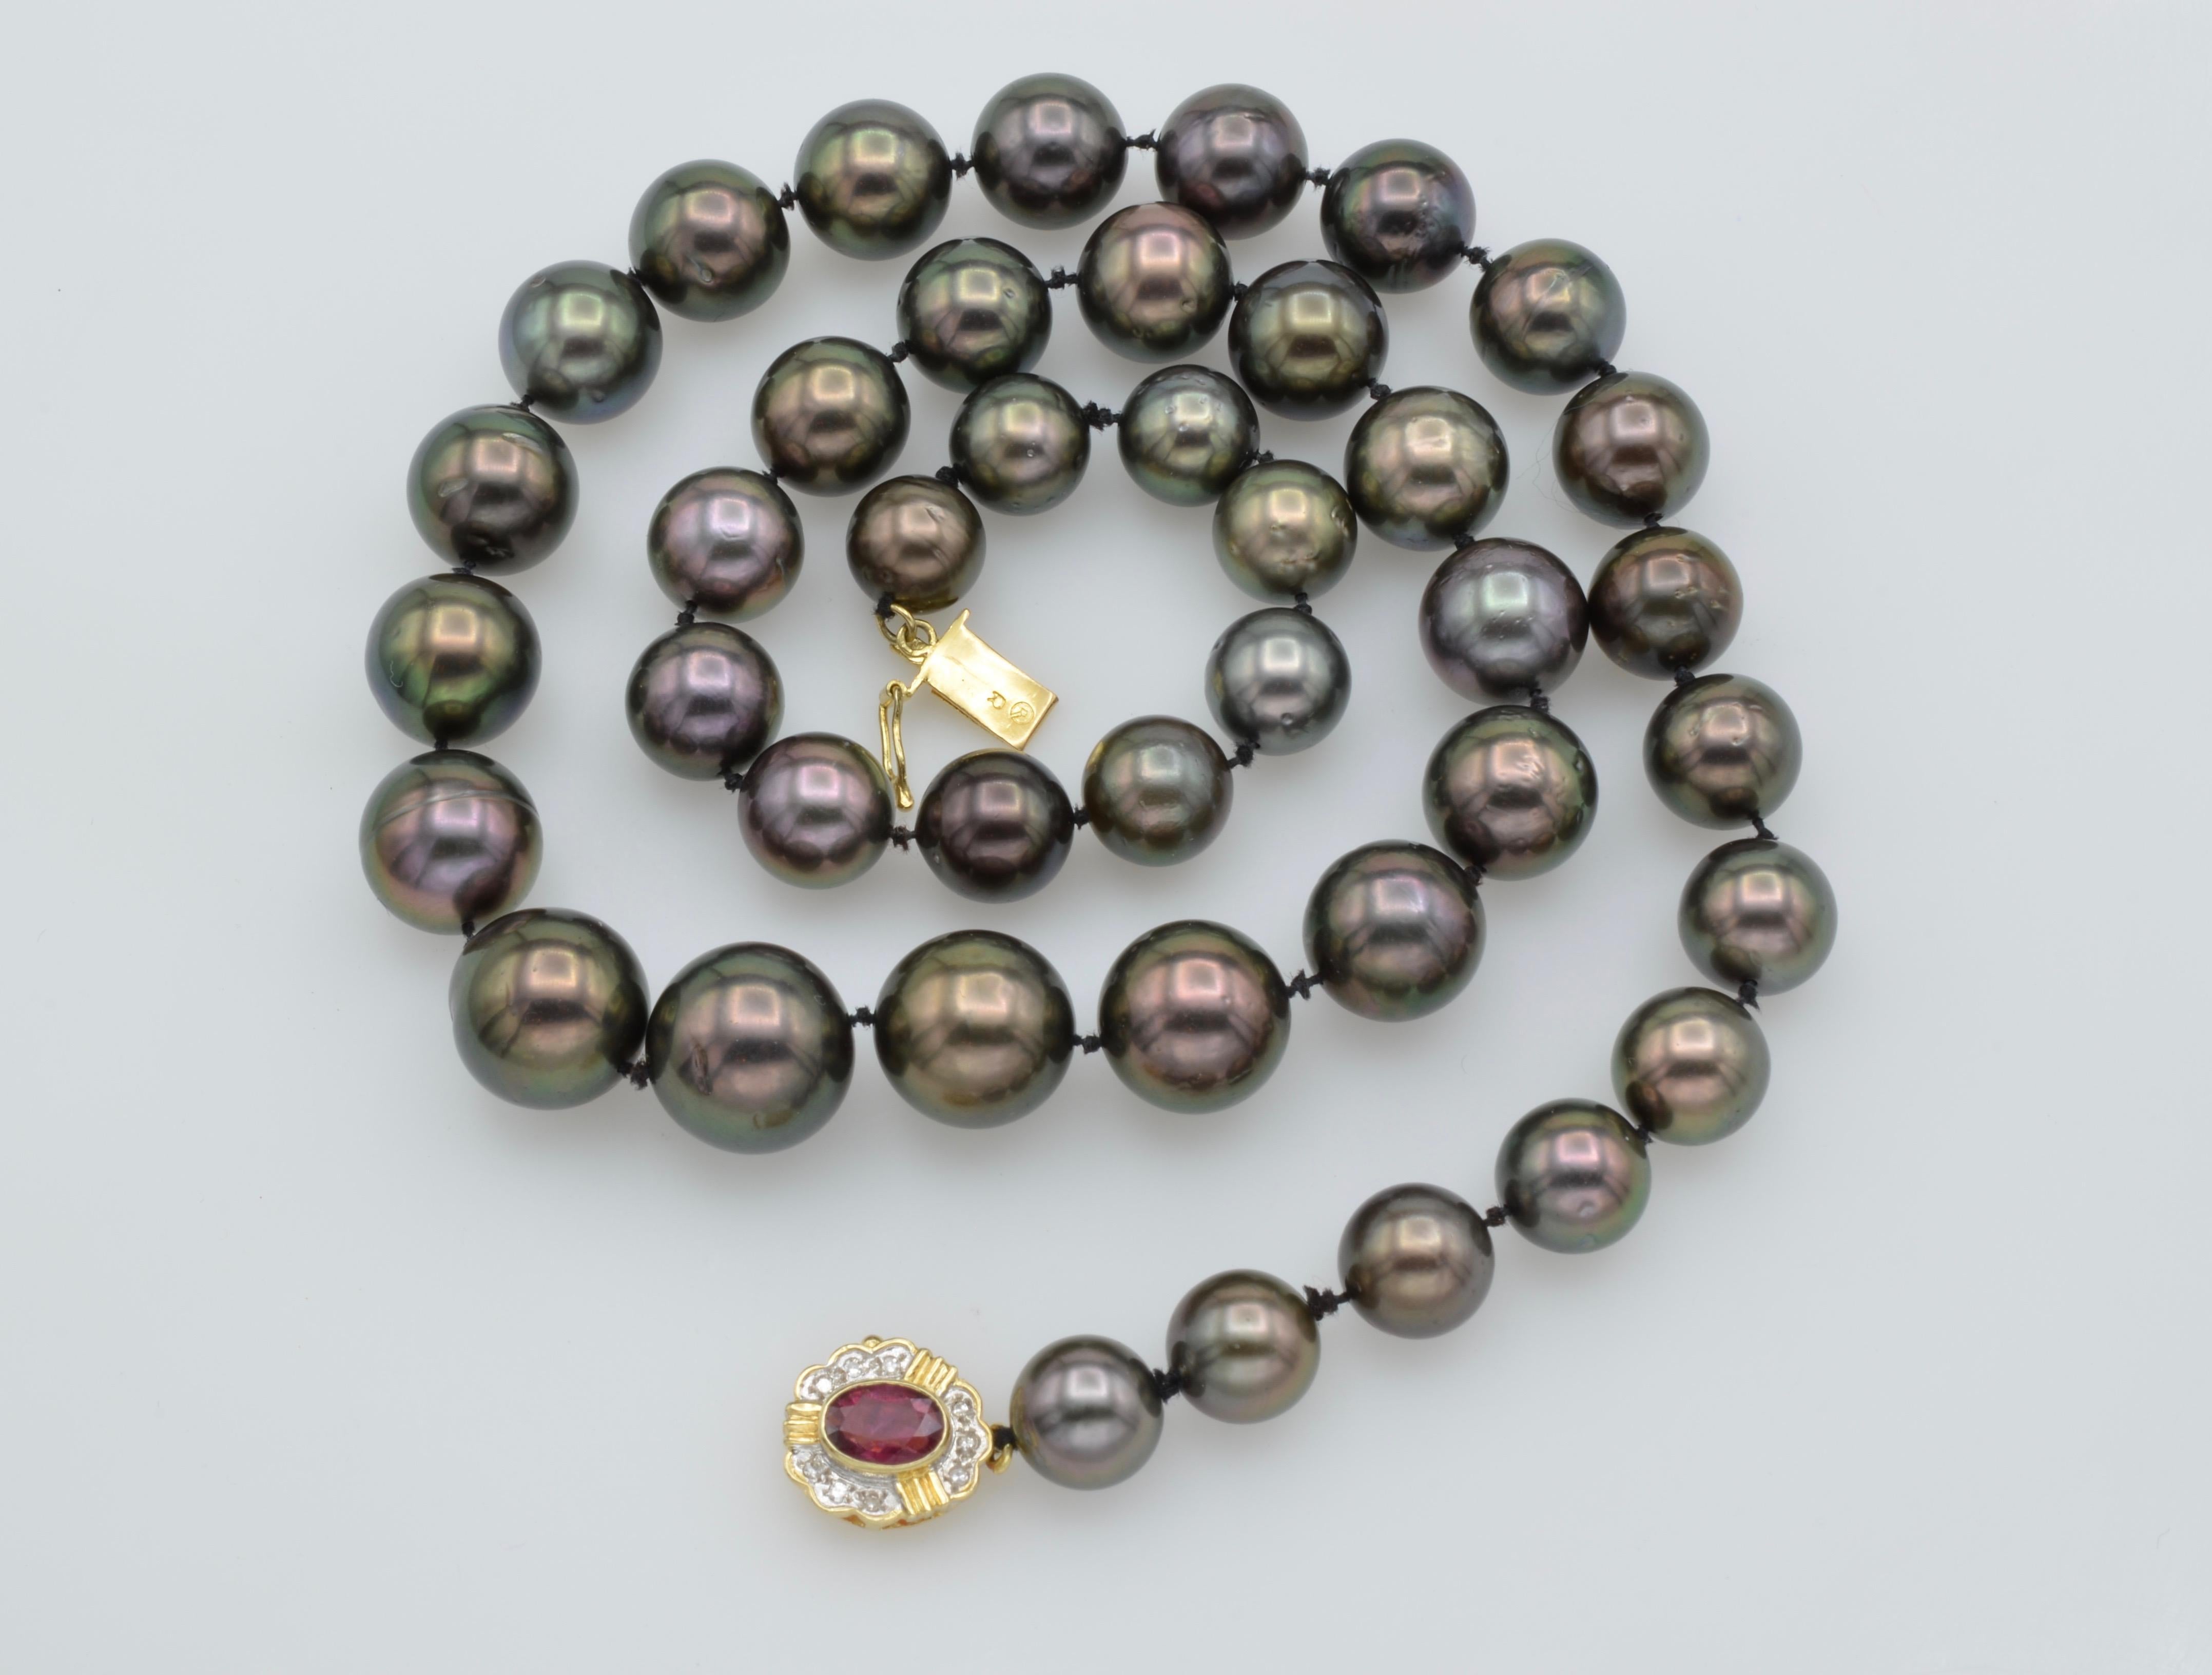 Oval Cut Black Tahiti Pearl Necklace with Ruby and Diamond Clasp